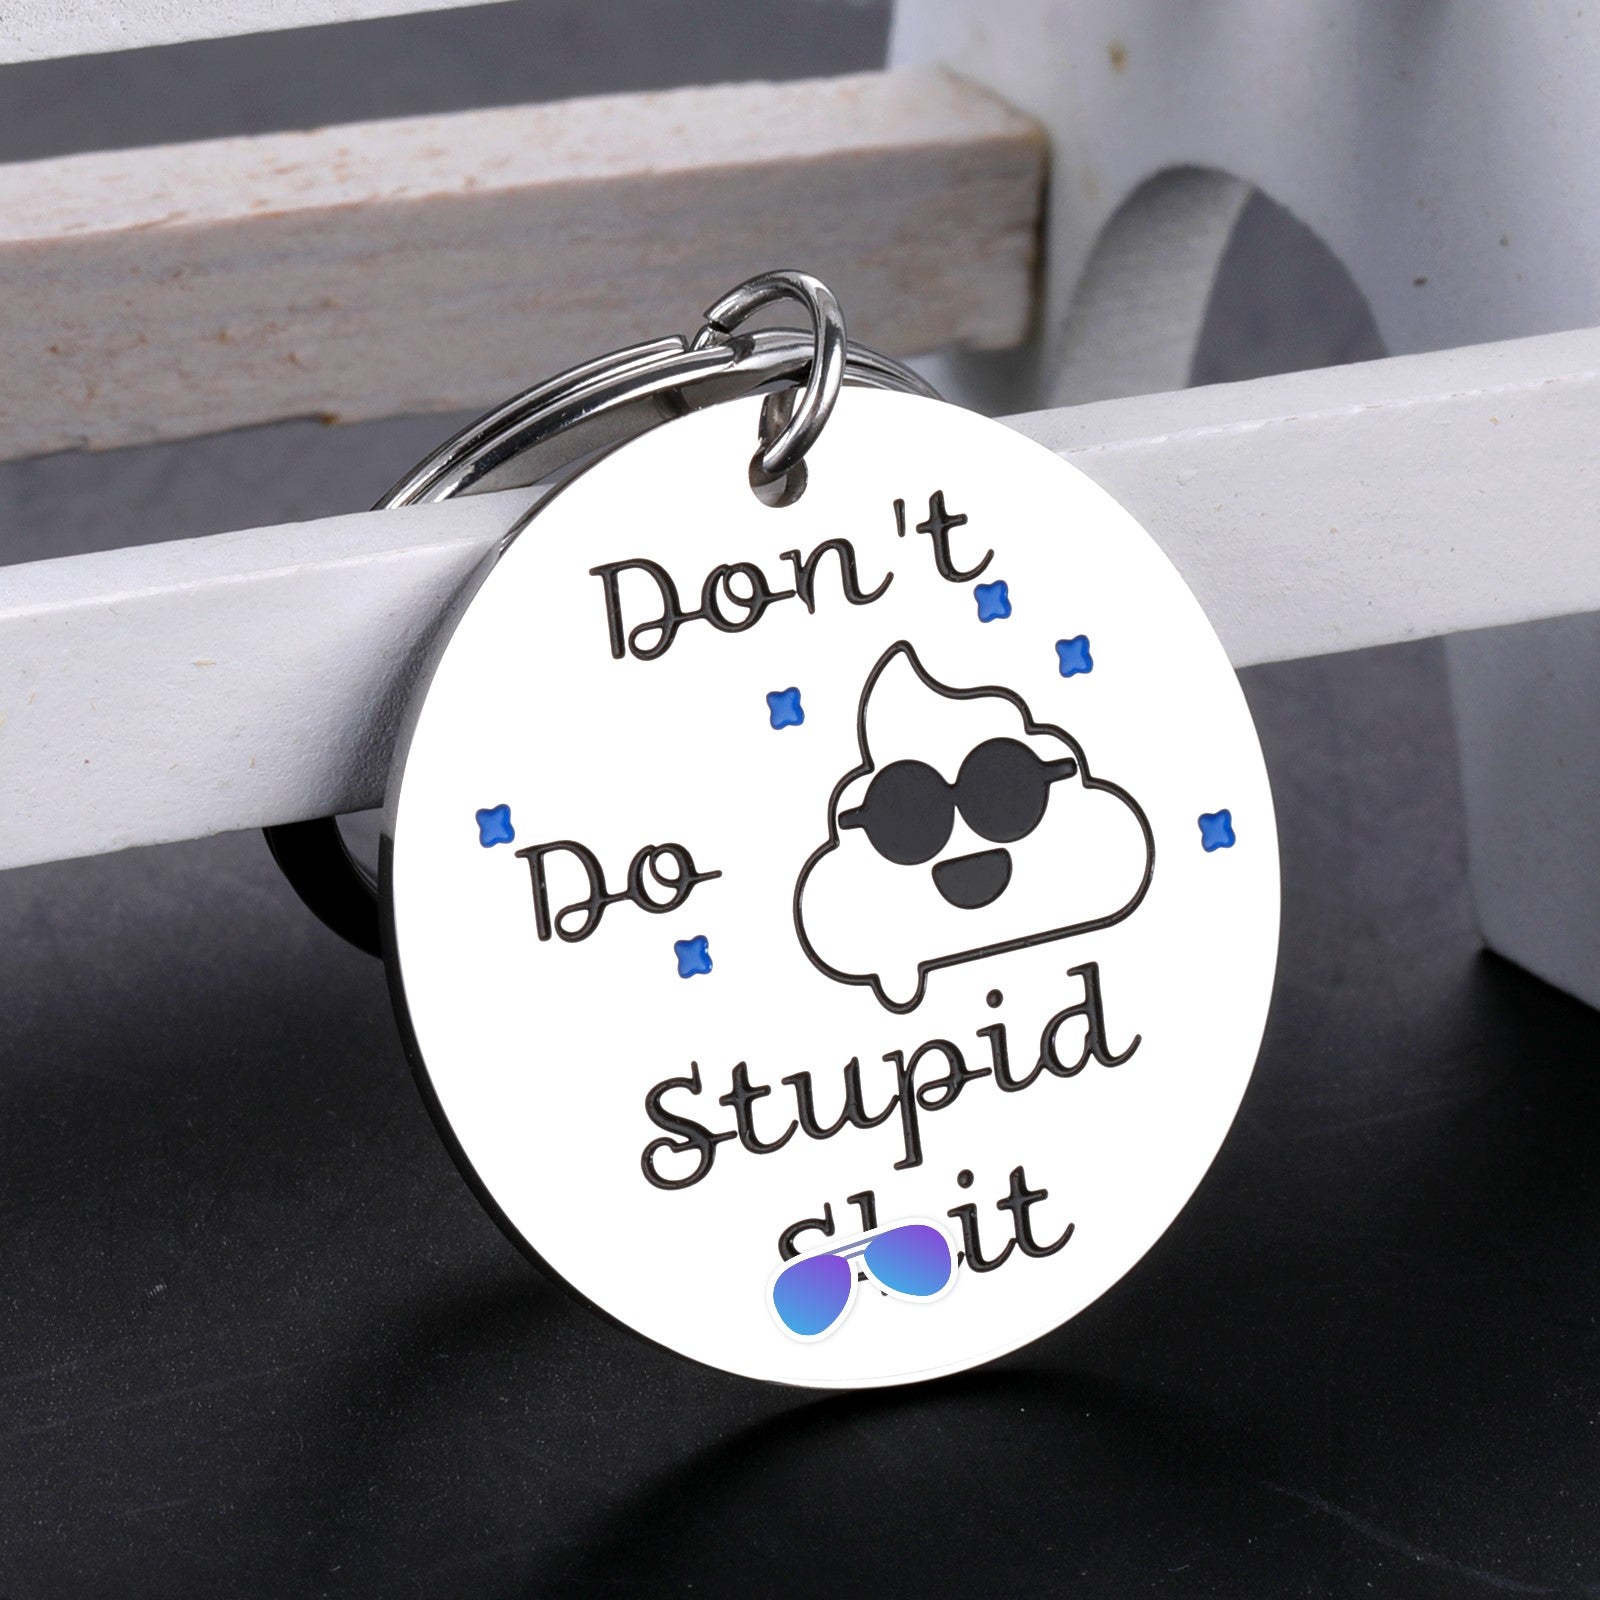 Don't Do Stupid Shit Keychain From Mom Funny Gift With Cute Poop